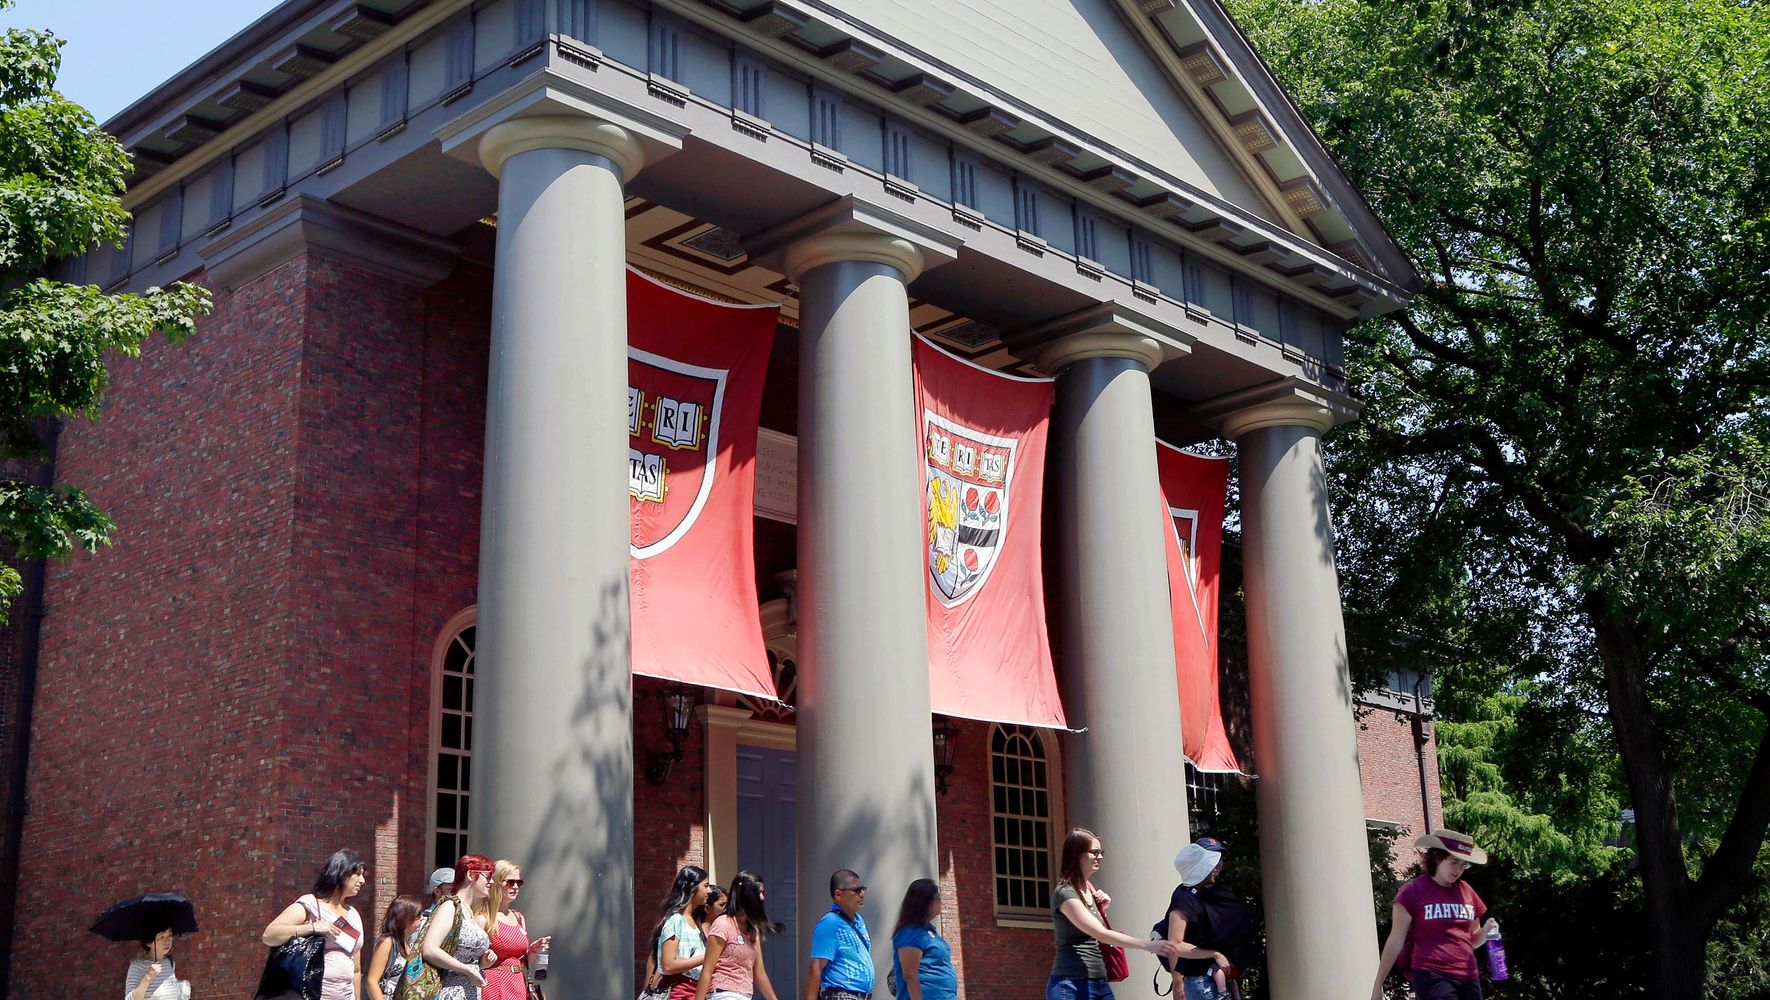 Harvard Pledges $100M To Research, Atone For Role In Slavery